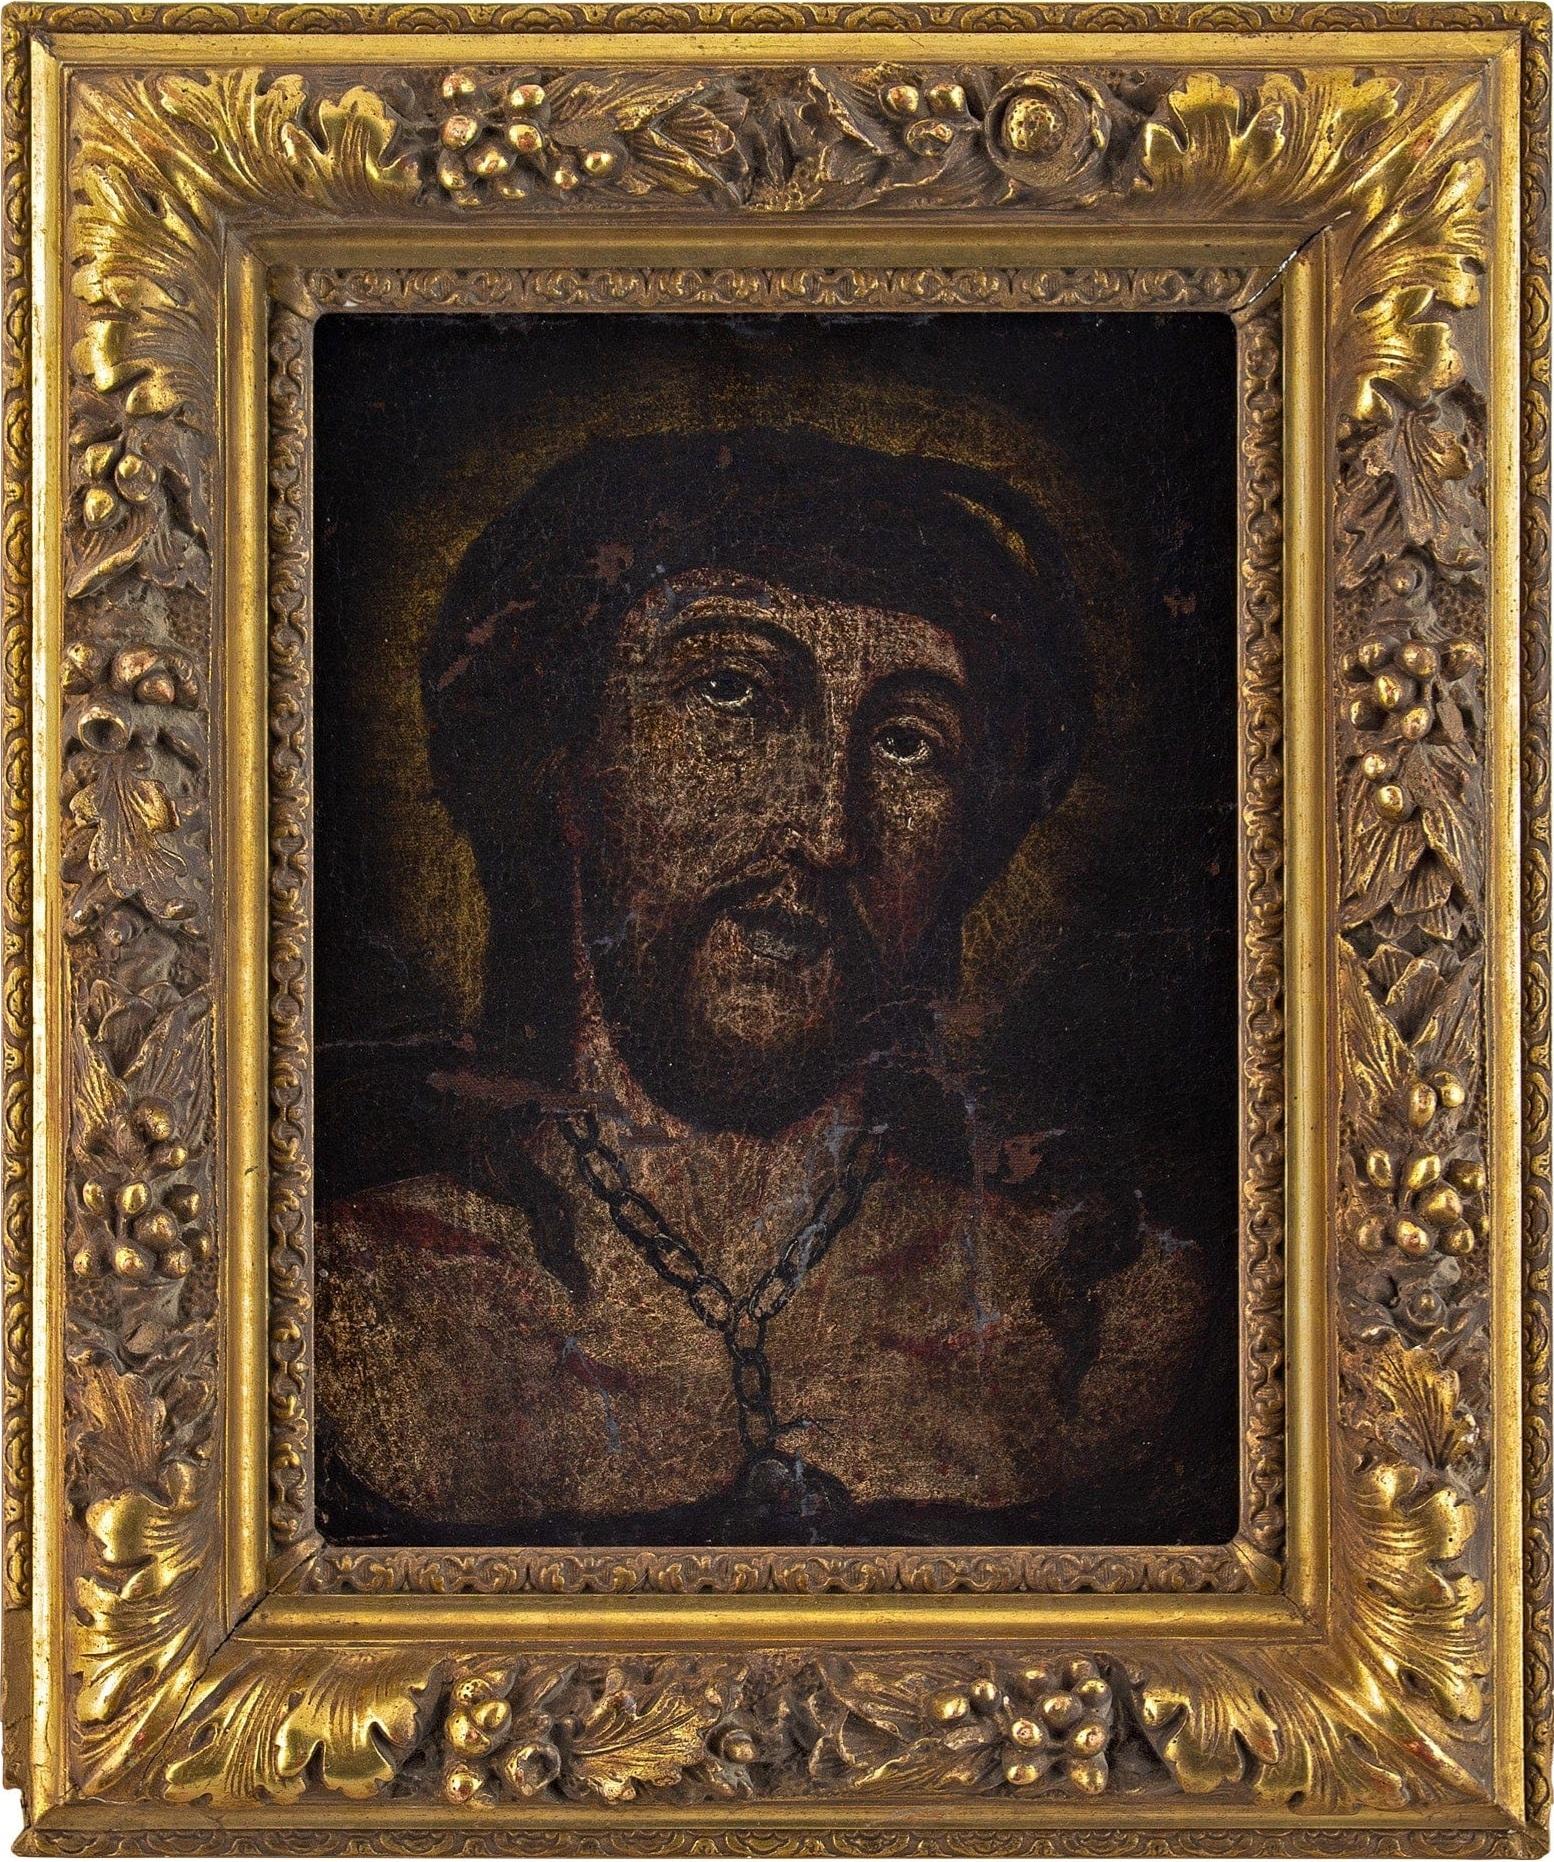 Unknown Figurative Painting - 17th-Century German School, The Passion Of The Christ, Oil Painting